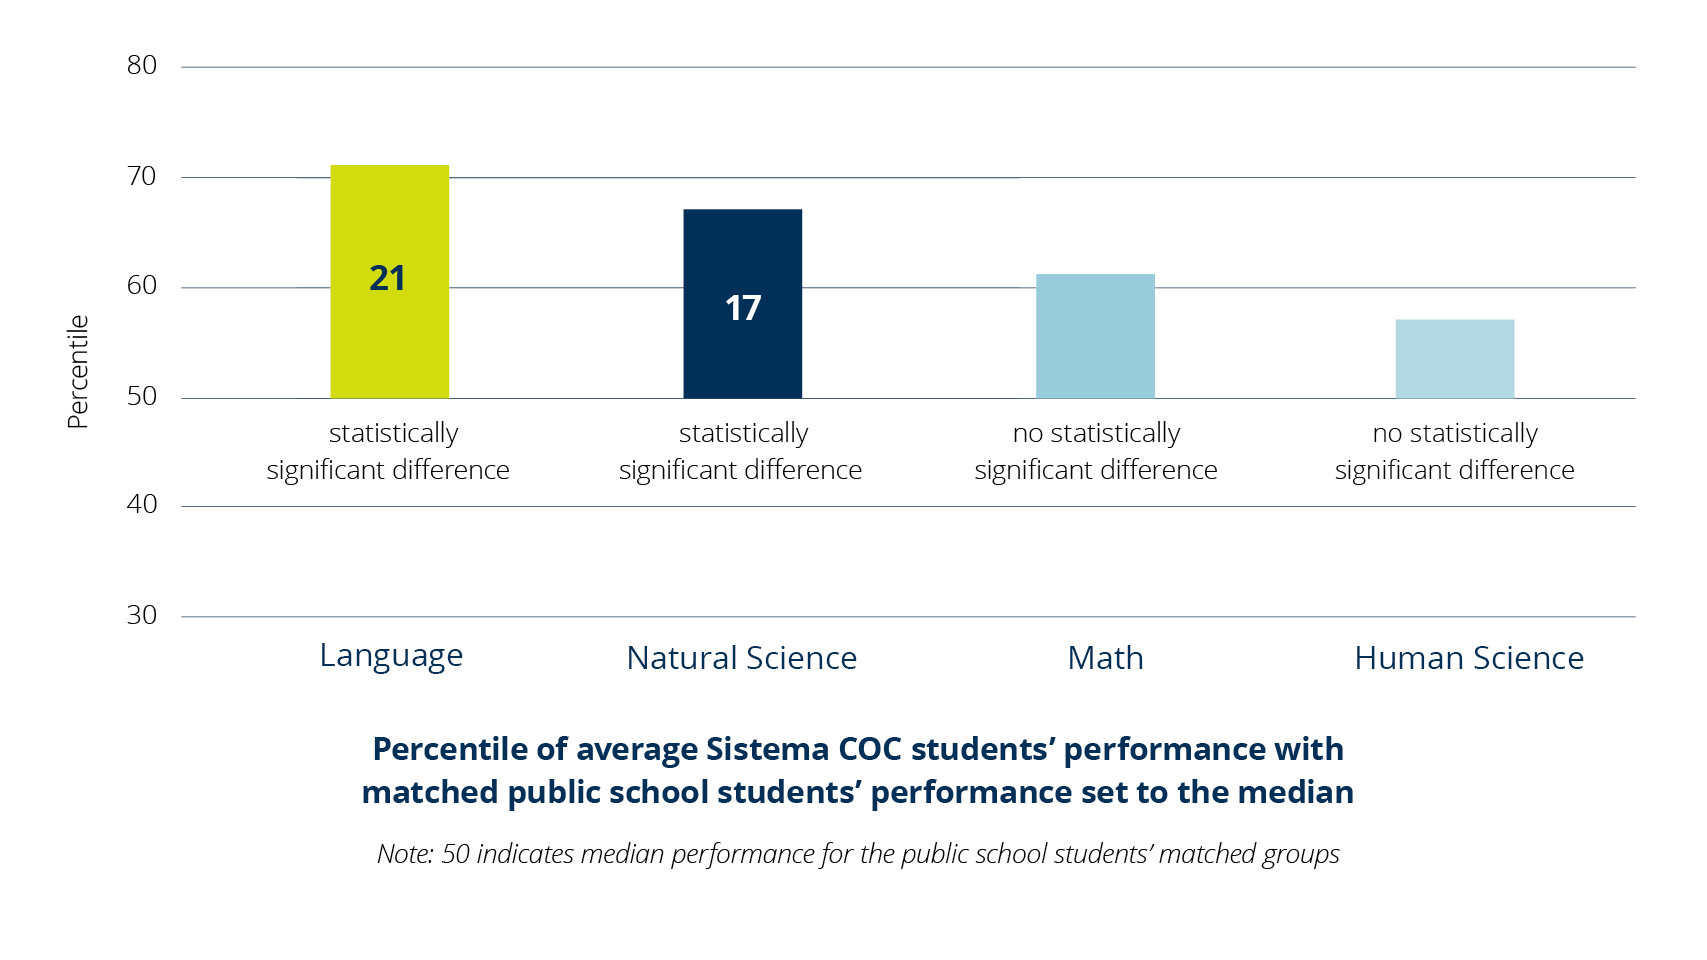 Percentile of average Sistema COC students' performance with matched public school students' performance set to the median